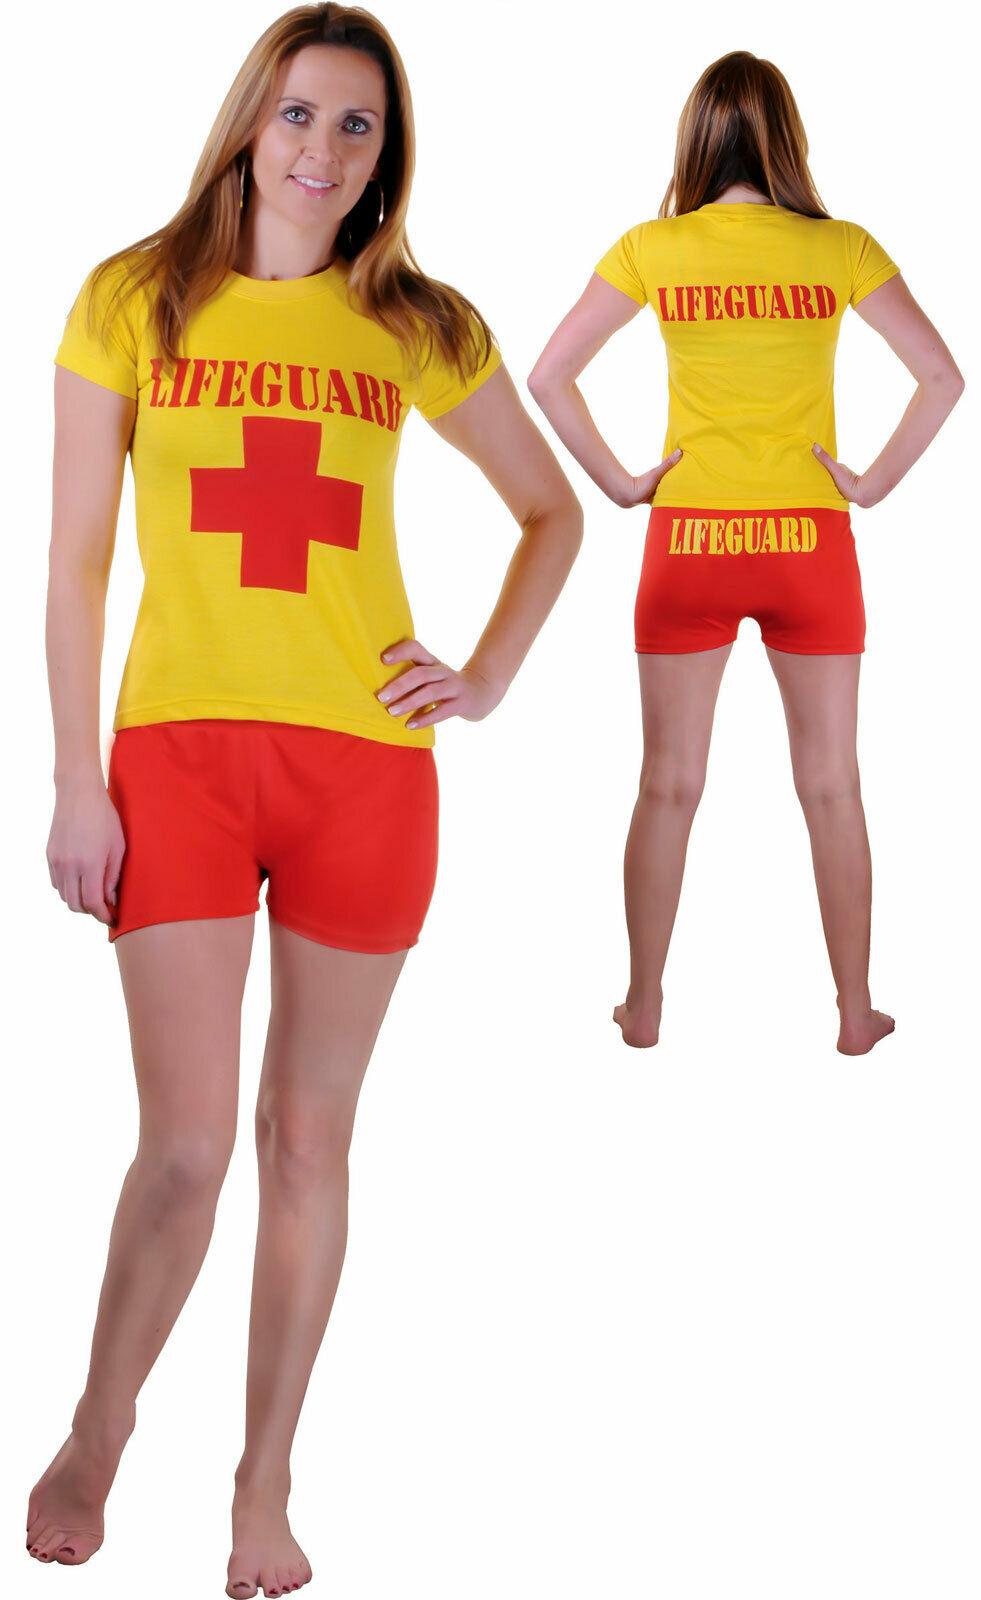 Ladies Life Guard T-shirt Hot Pant Red Yellow Beach Miami Rescue Fancy Dress - Labreeze